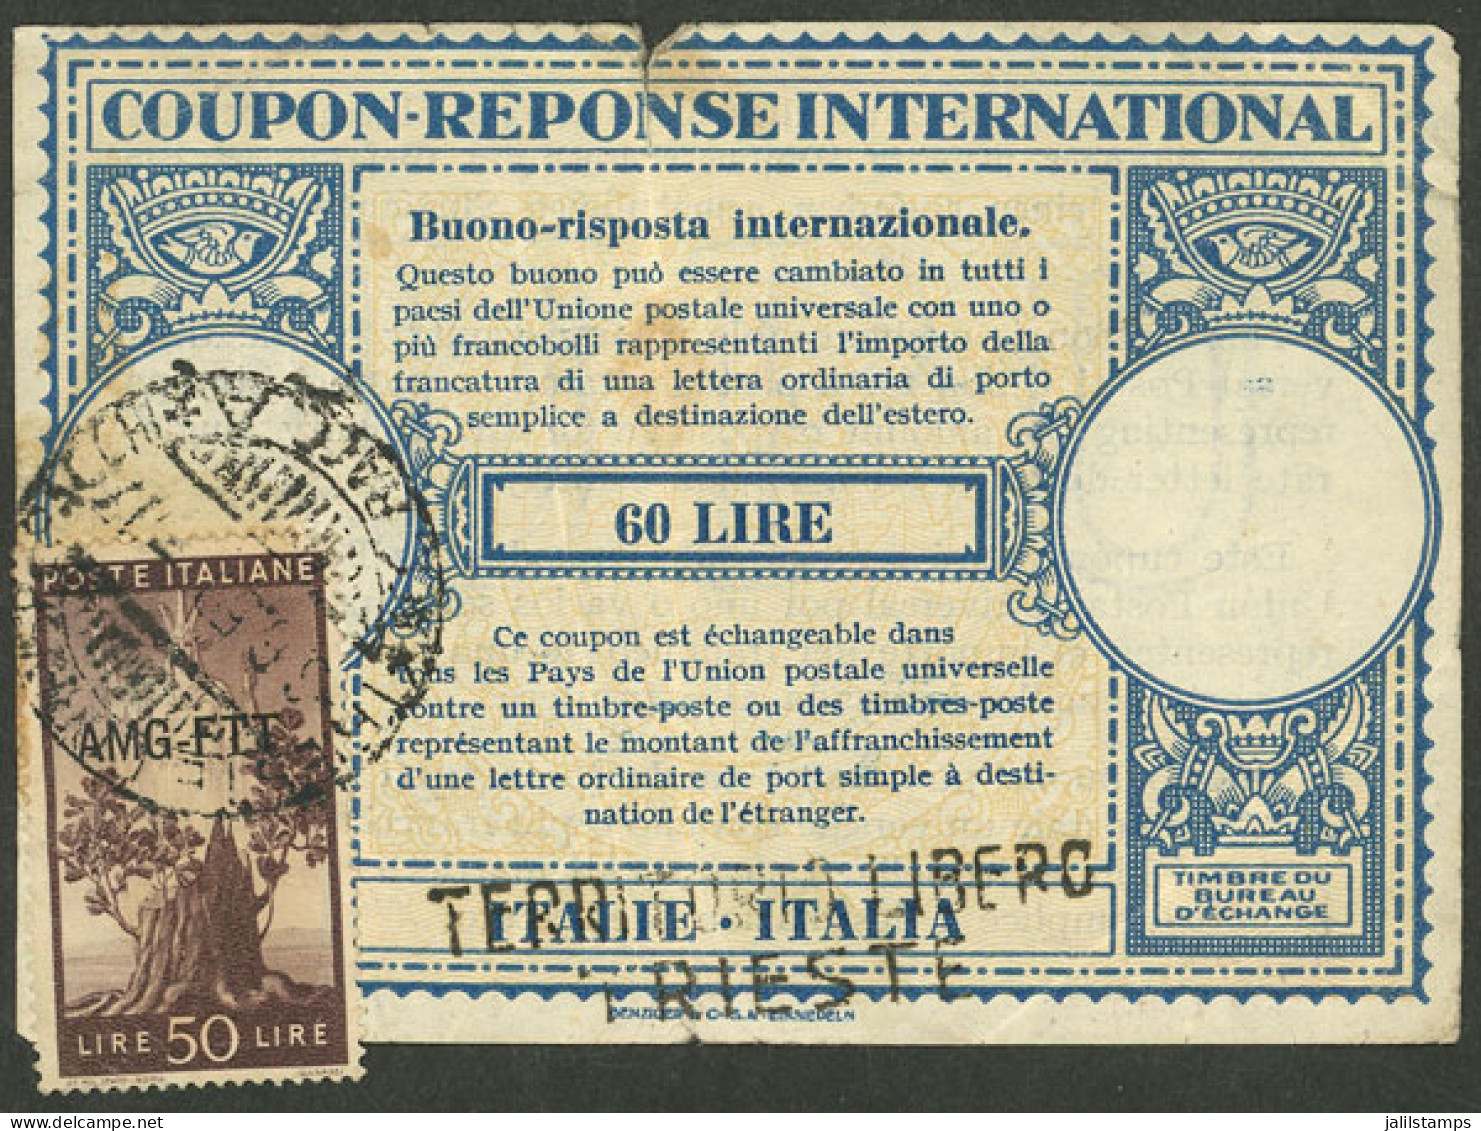 ITALY - TRIESTE: Year 1959, IRC Interesting Reply Coupon Of Italy (original Value 60L.), With A Stamp Of 50L. Overprinte - Unclassified